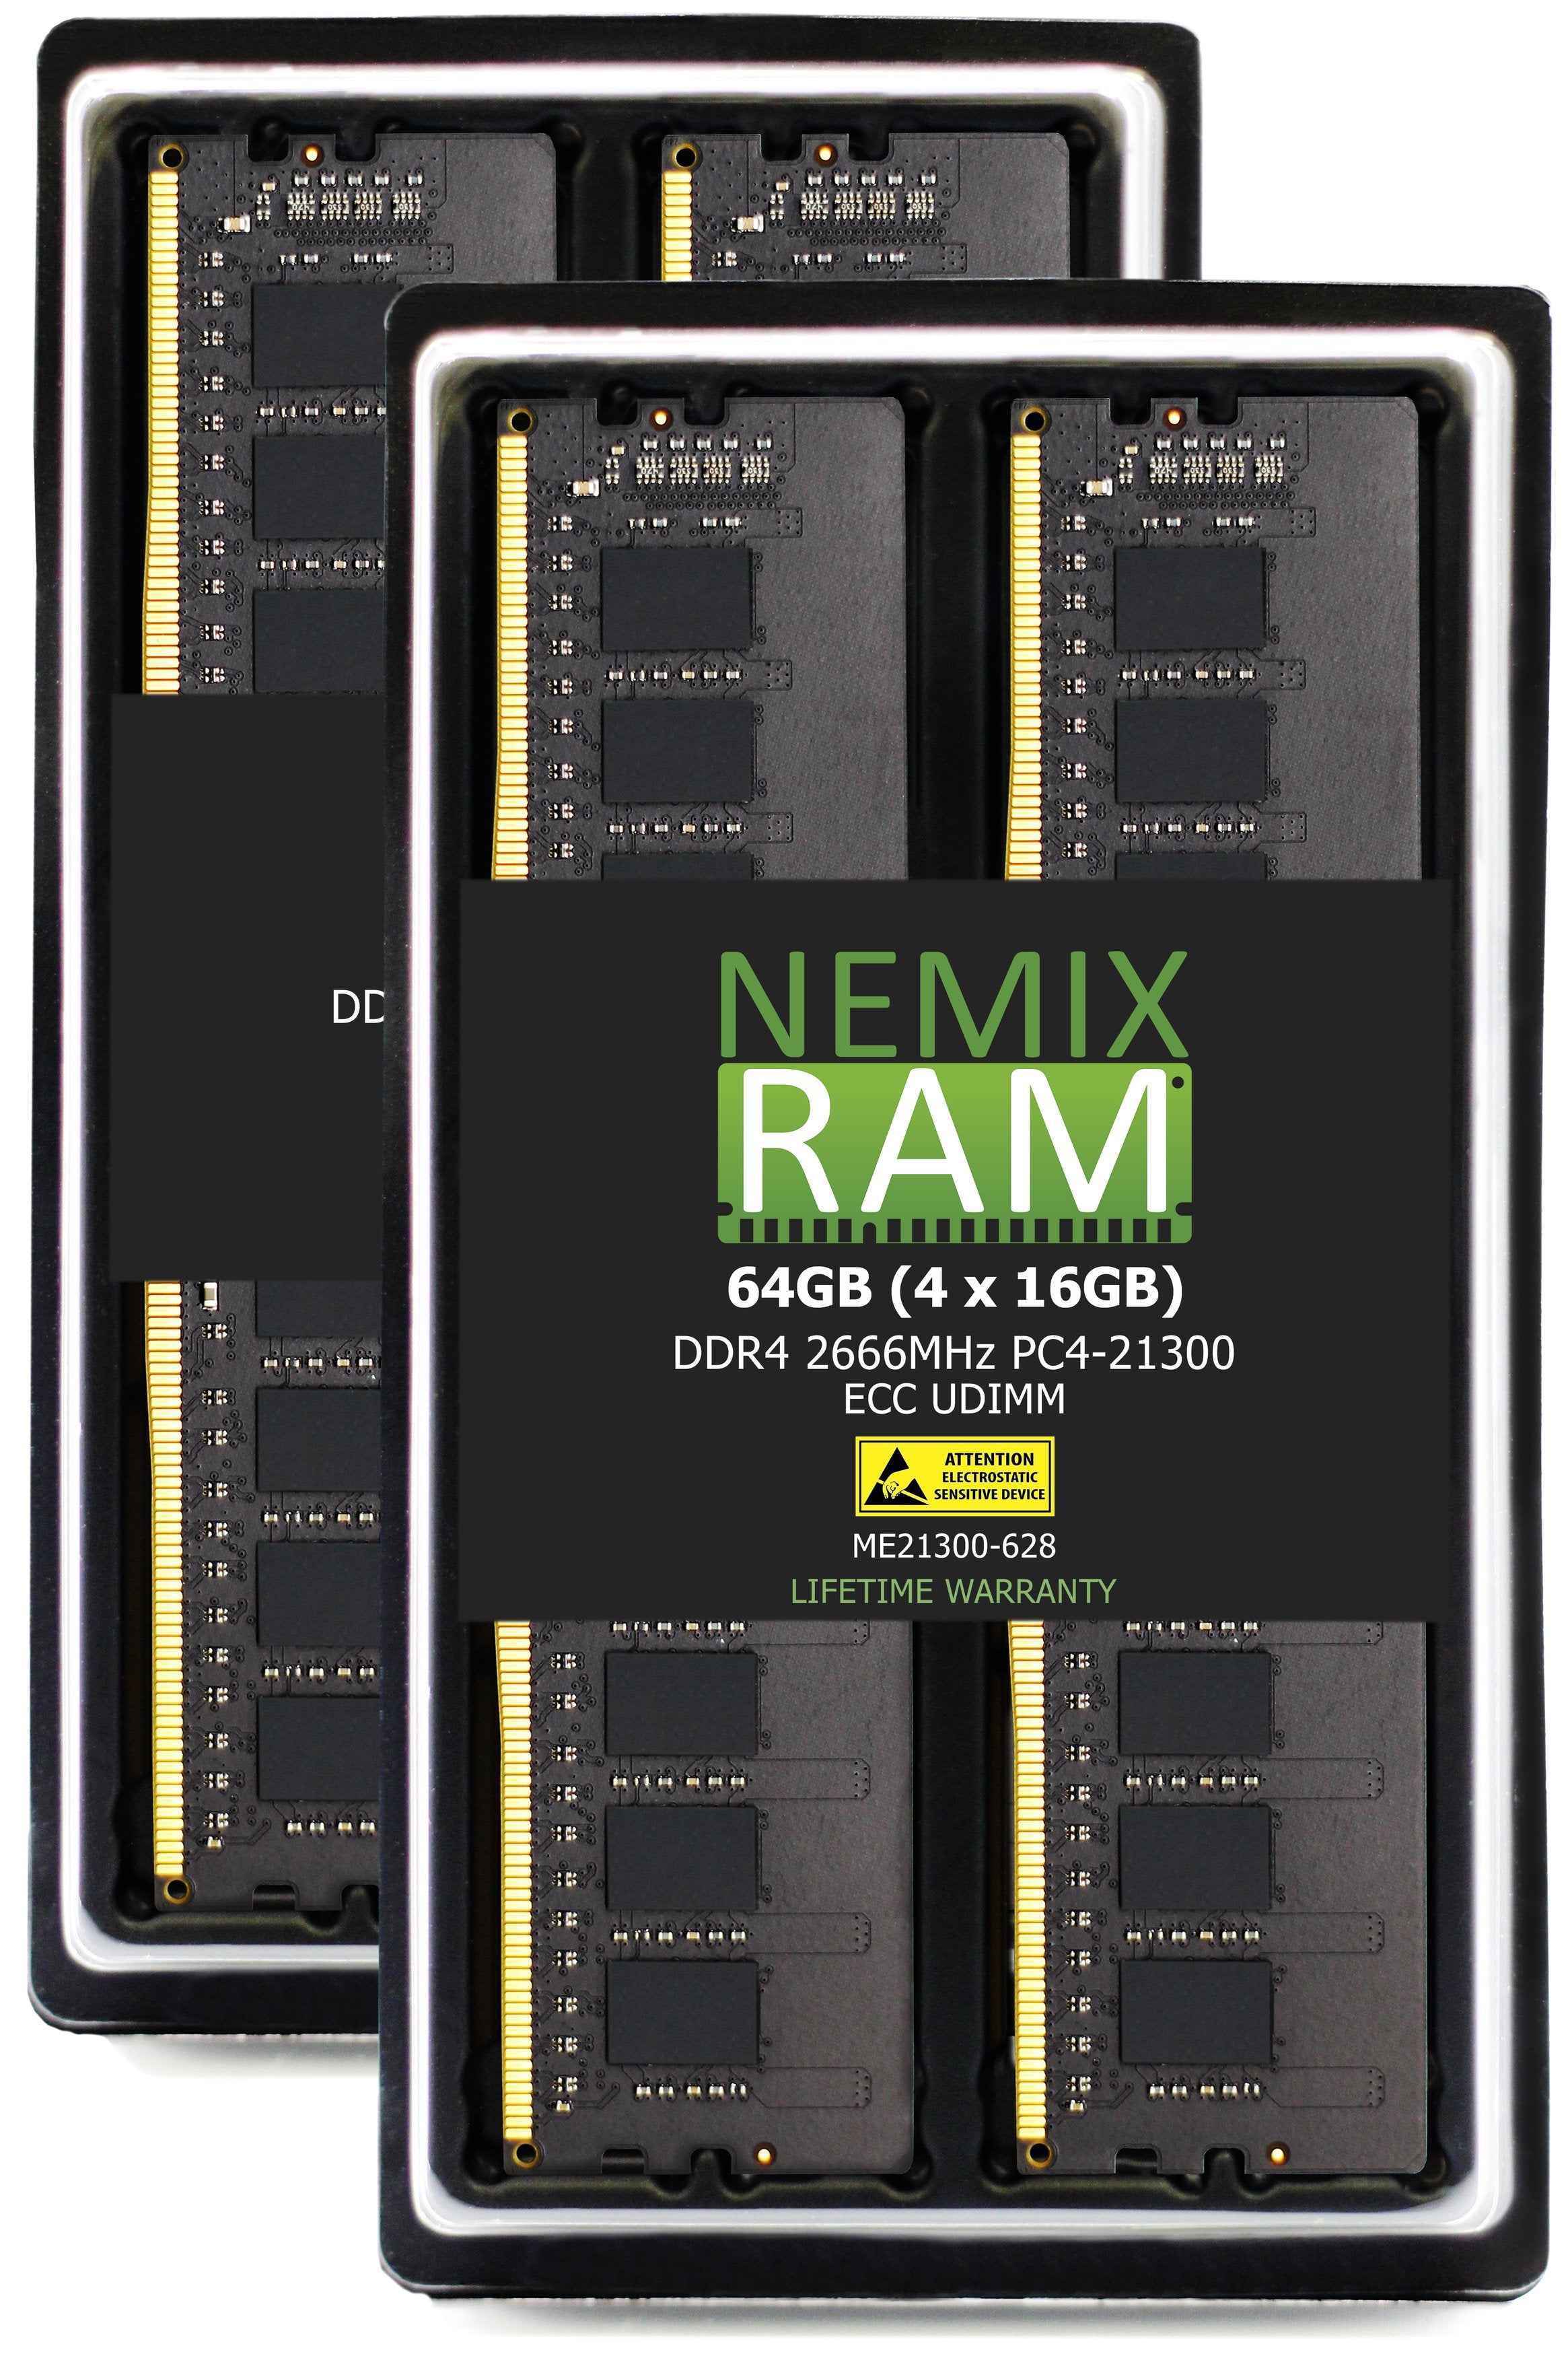 DDR4 2666MHZ PC4-21300 ECC UDIMM Compatible with Synology D4EC-2666-16G